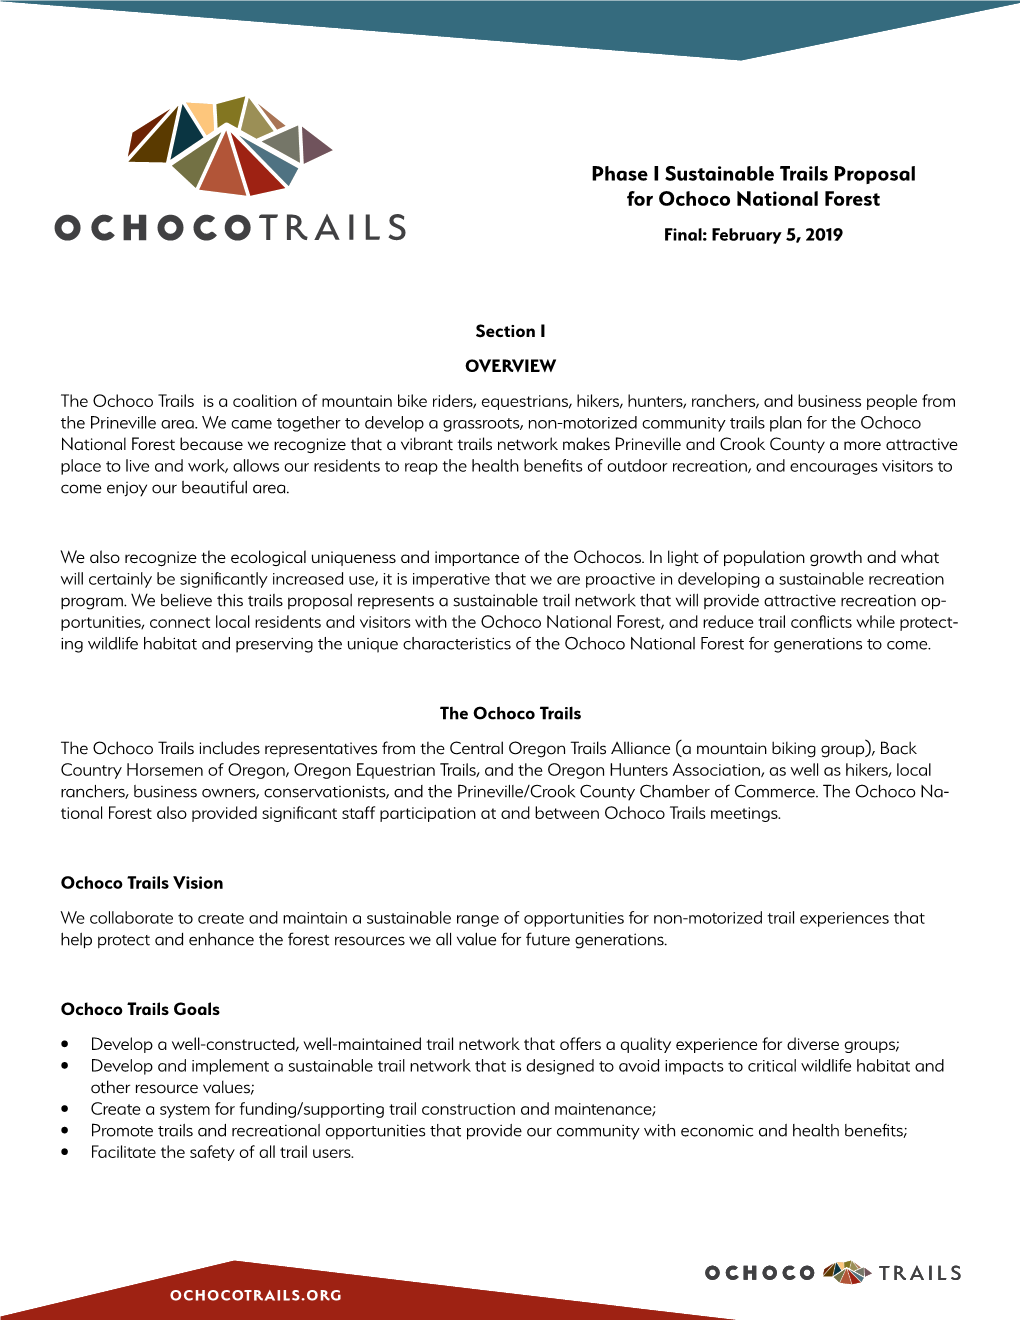 Phase I Sustainable Trails Proposal for Ochoco National Forest Final: February 5, 2019